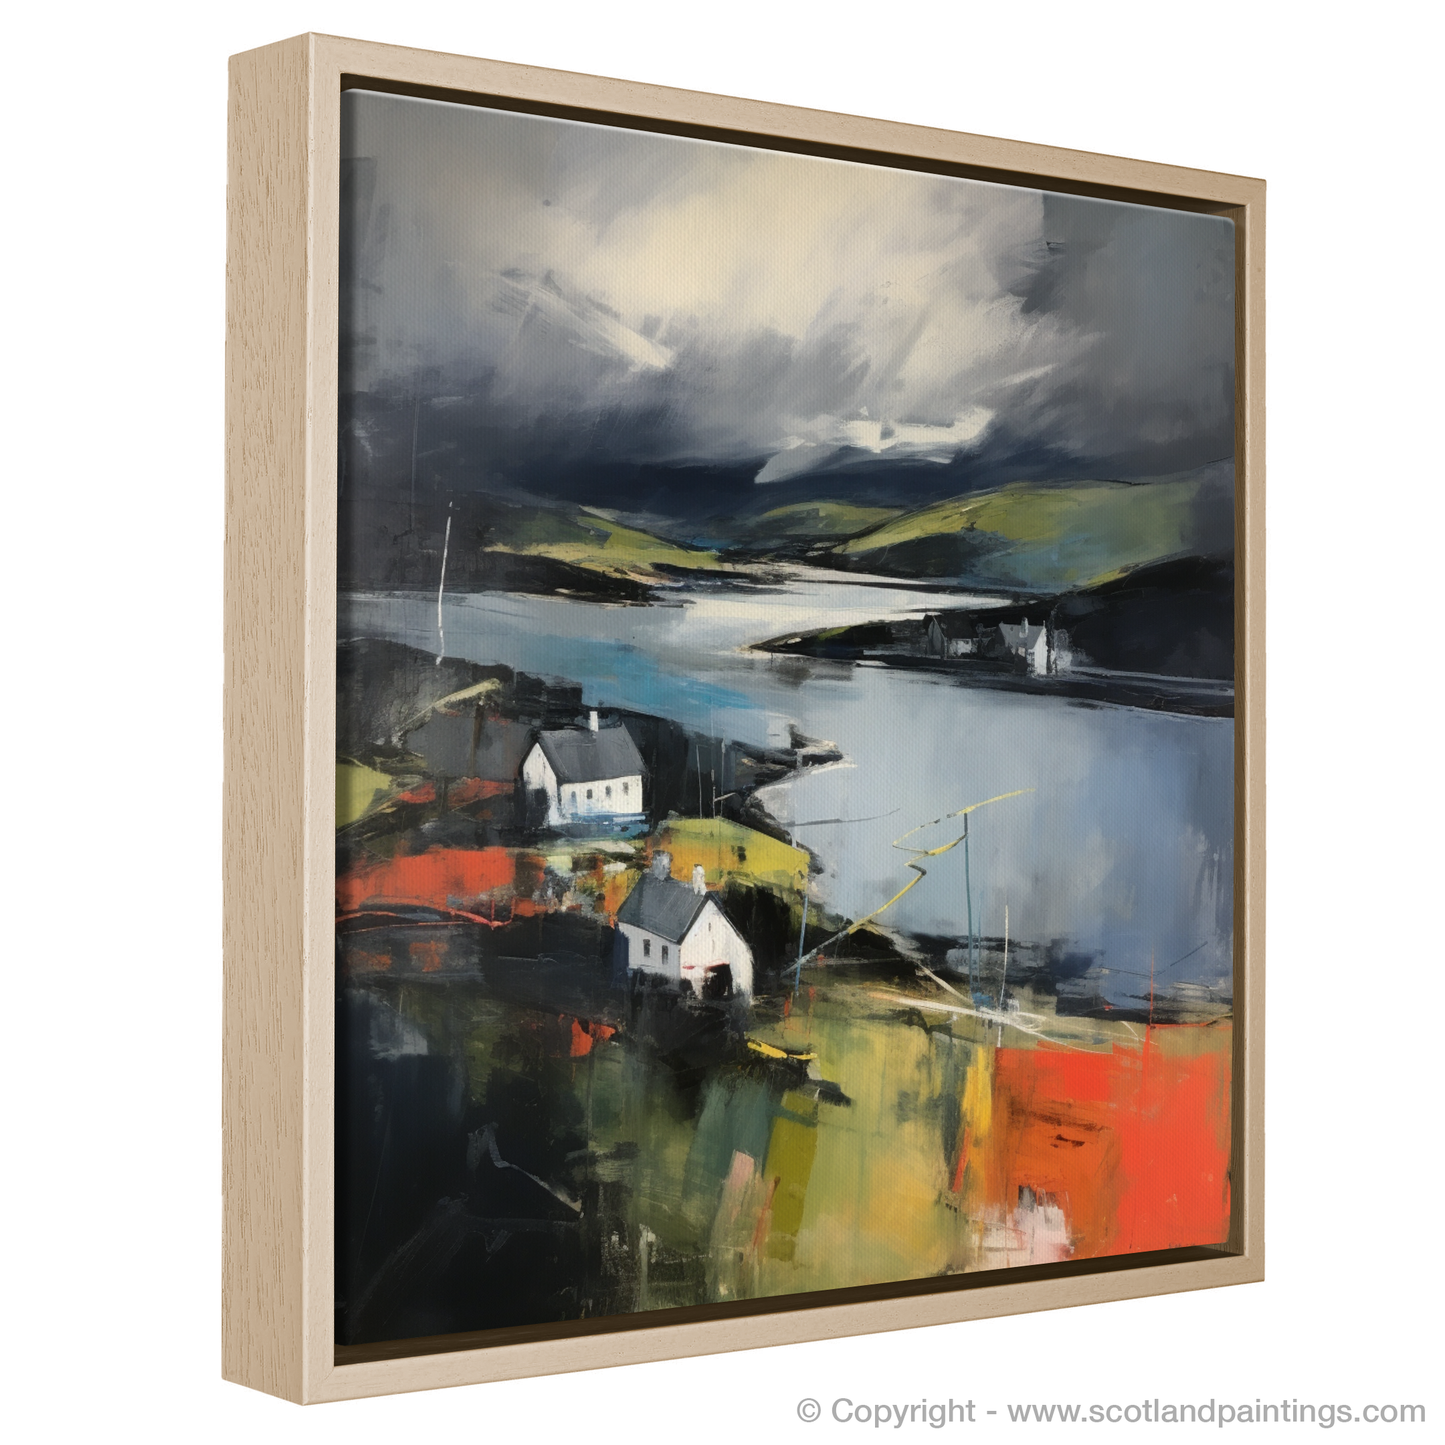 Tempest over Gairloch Harbour: An Abstract Impressionist Escape